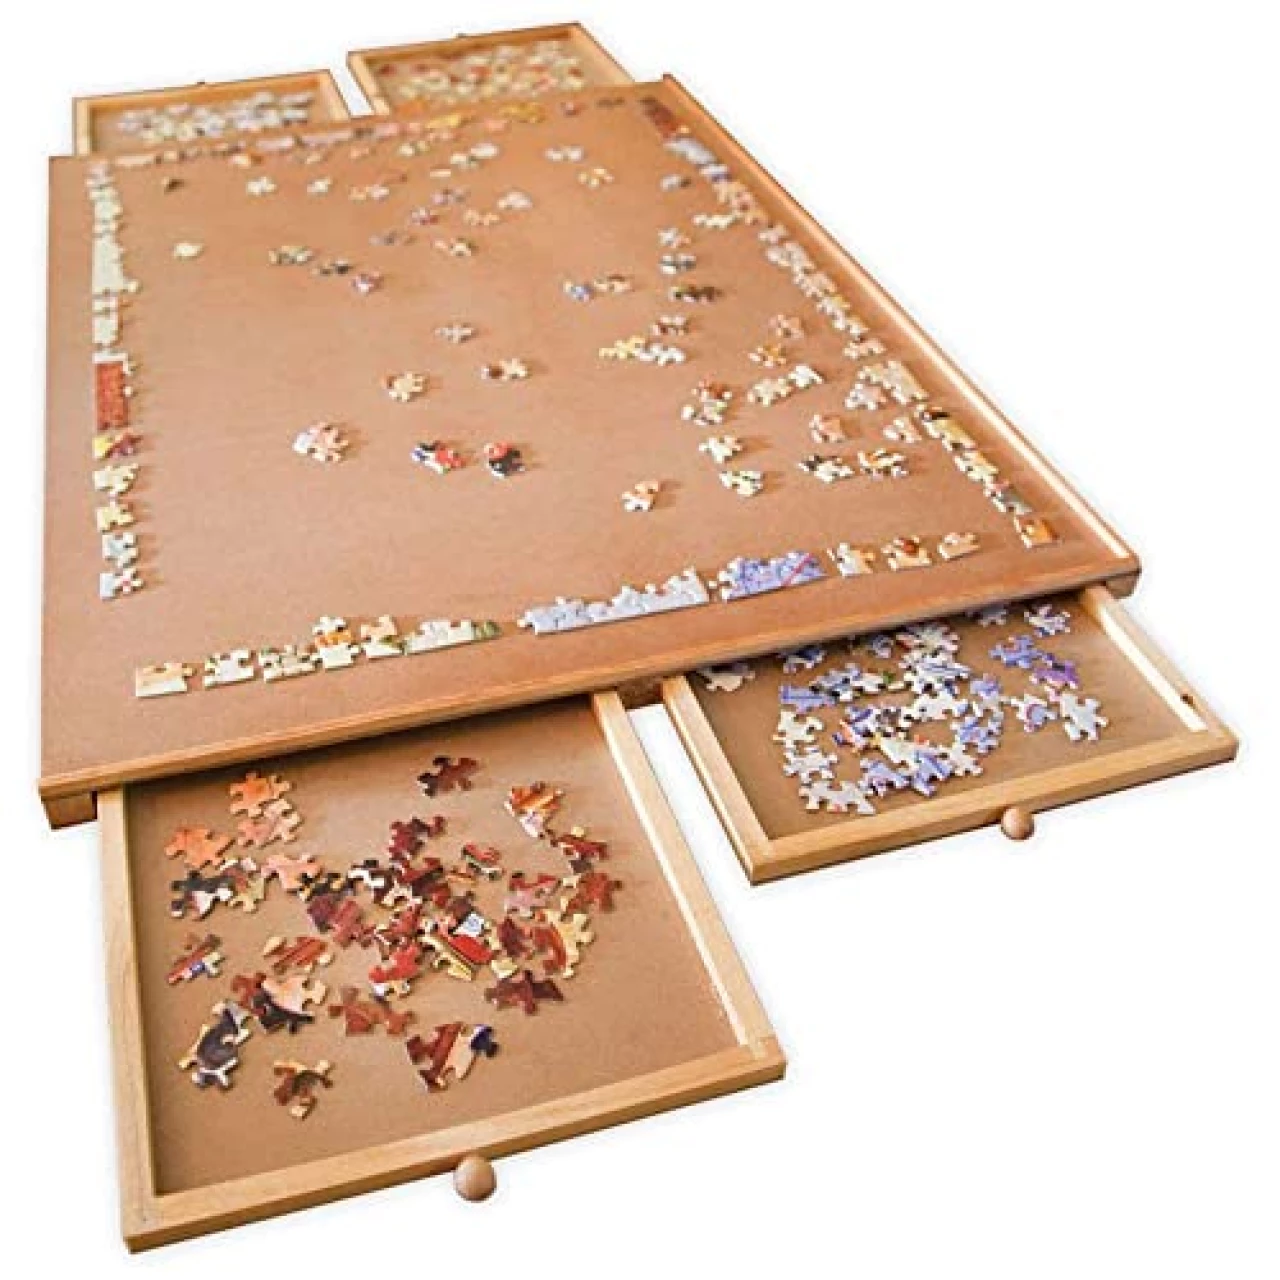 Bits and Pieces - 1500 Piece Puzzle Board with Drawers - Jumbo Wooden Puzzle Plateau – Portable Puzzle Table